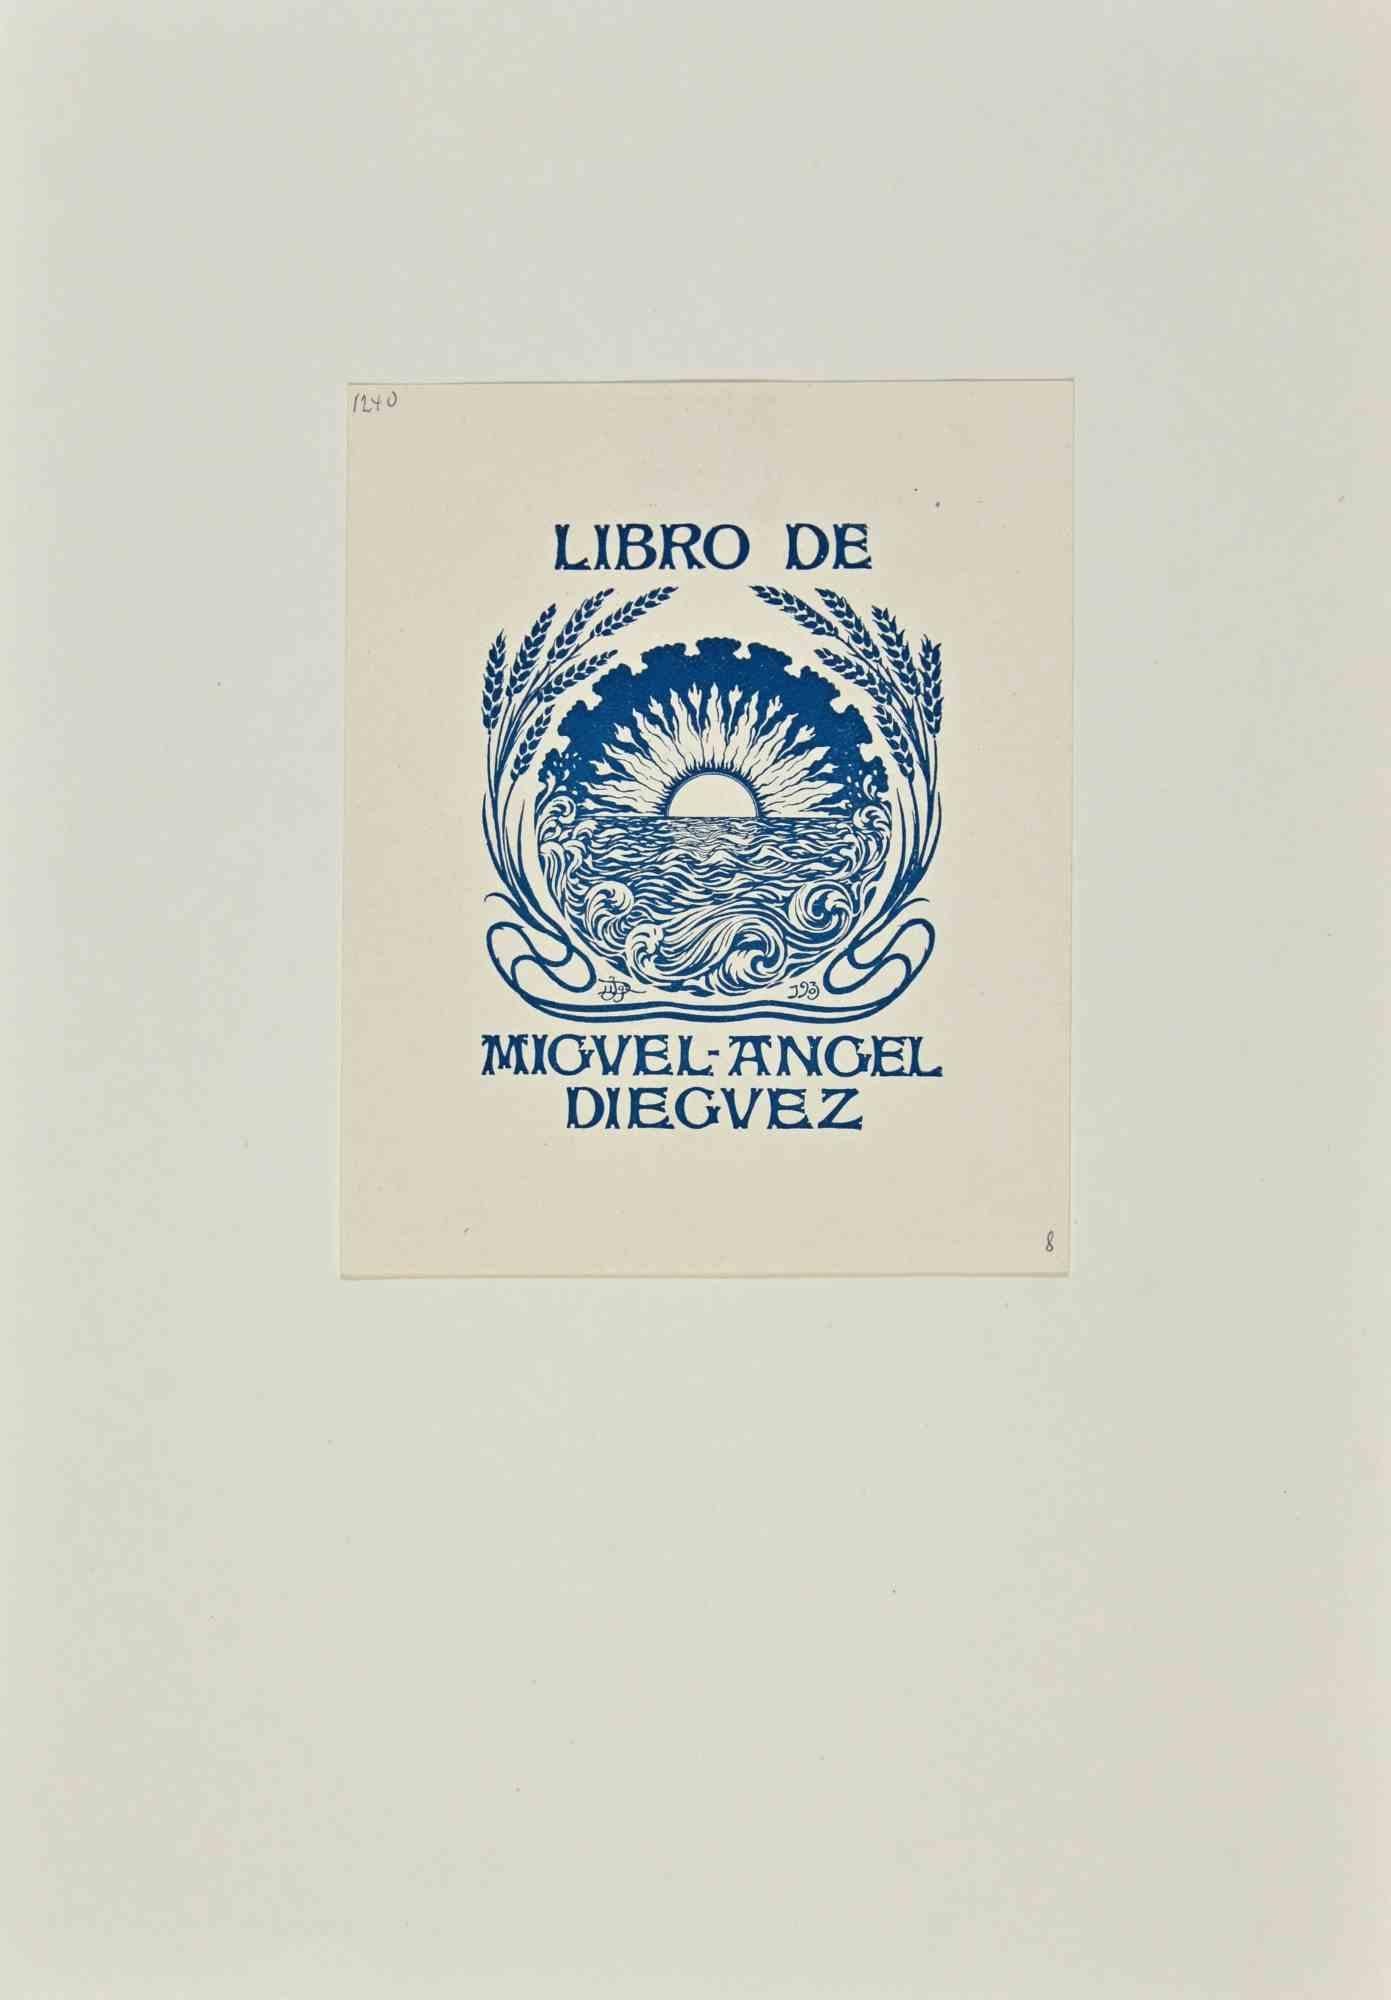 Libro de Miguel Angel Dieguez is a Modern Artwork realized in 1903, by the Spanish Artist Joaquín Diéguez y Díaz.
 
Coloured woodcut on paper. Hand signed on the back
 
The work is glued on cardboard.
 
Total dimensions: 21x 14.5 cm.

Excellent